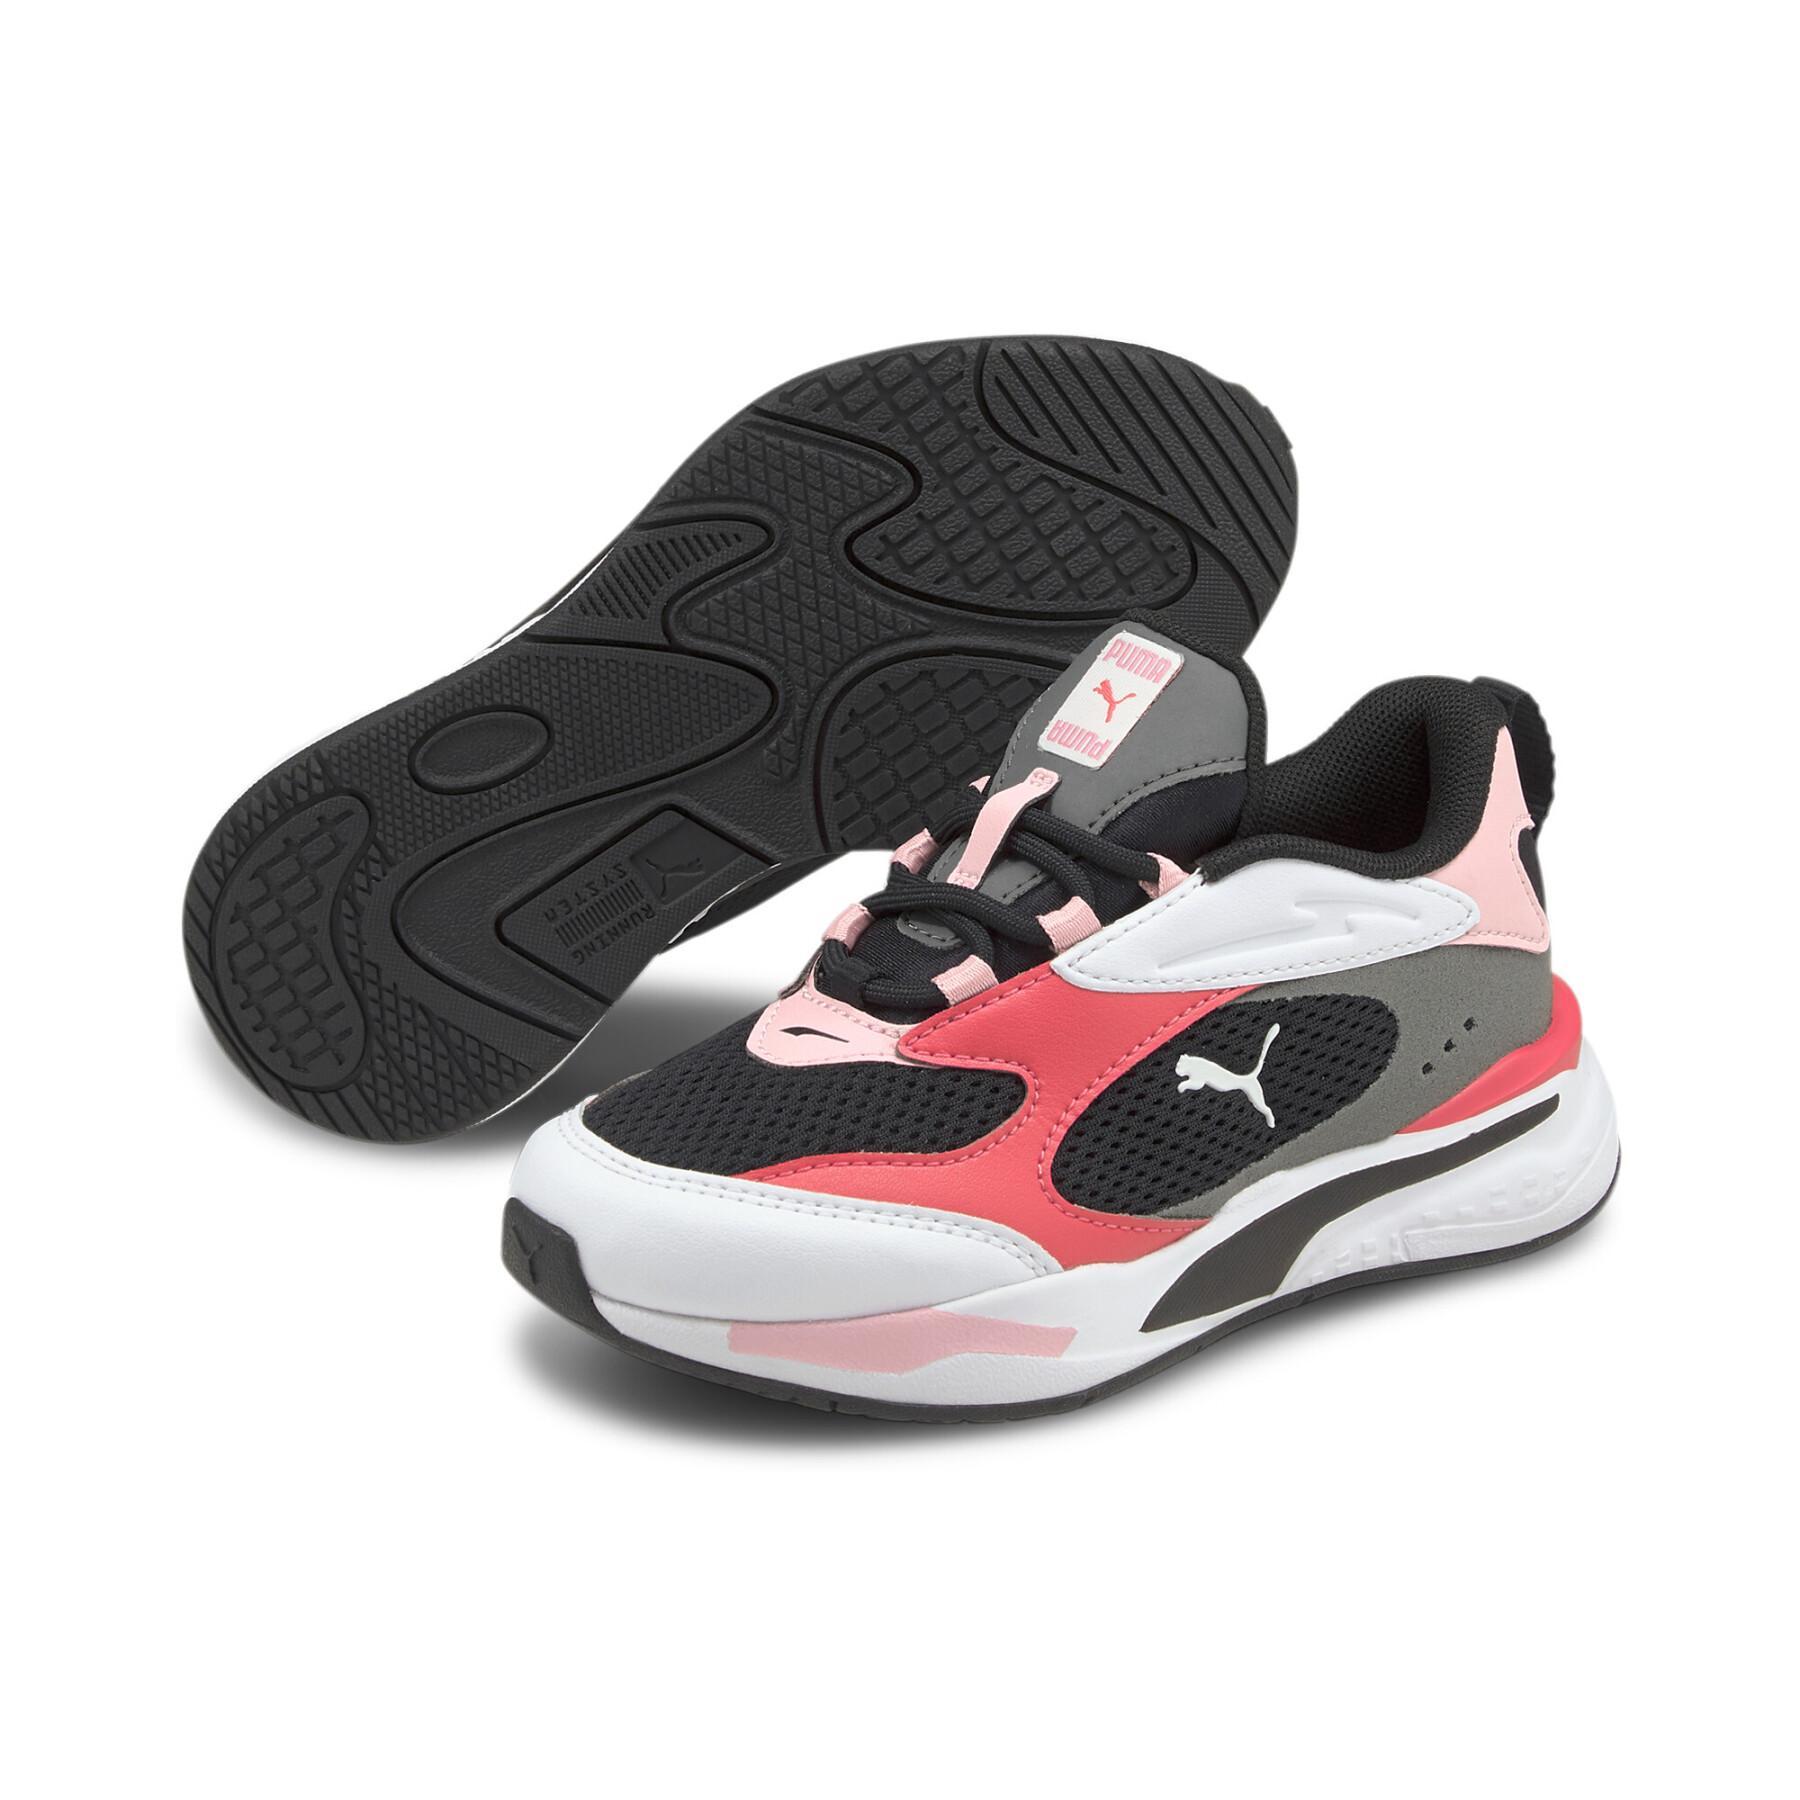 Chaussures enfant Puma RS-Fast PS